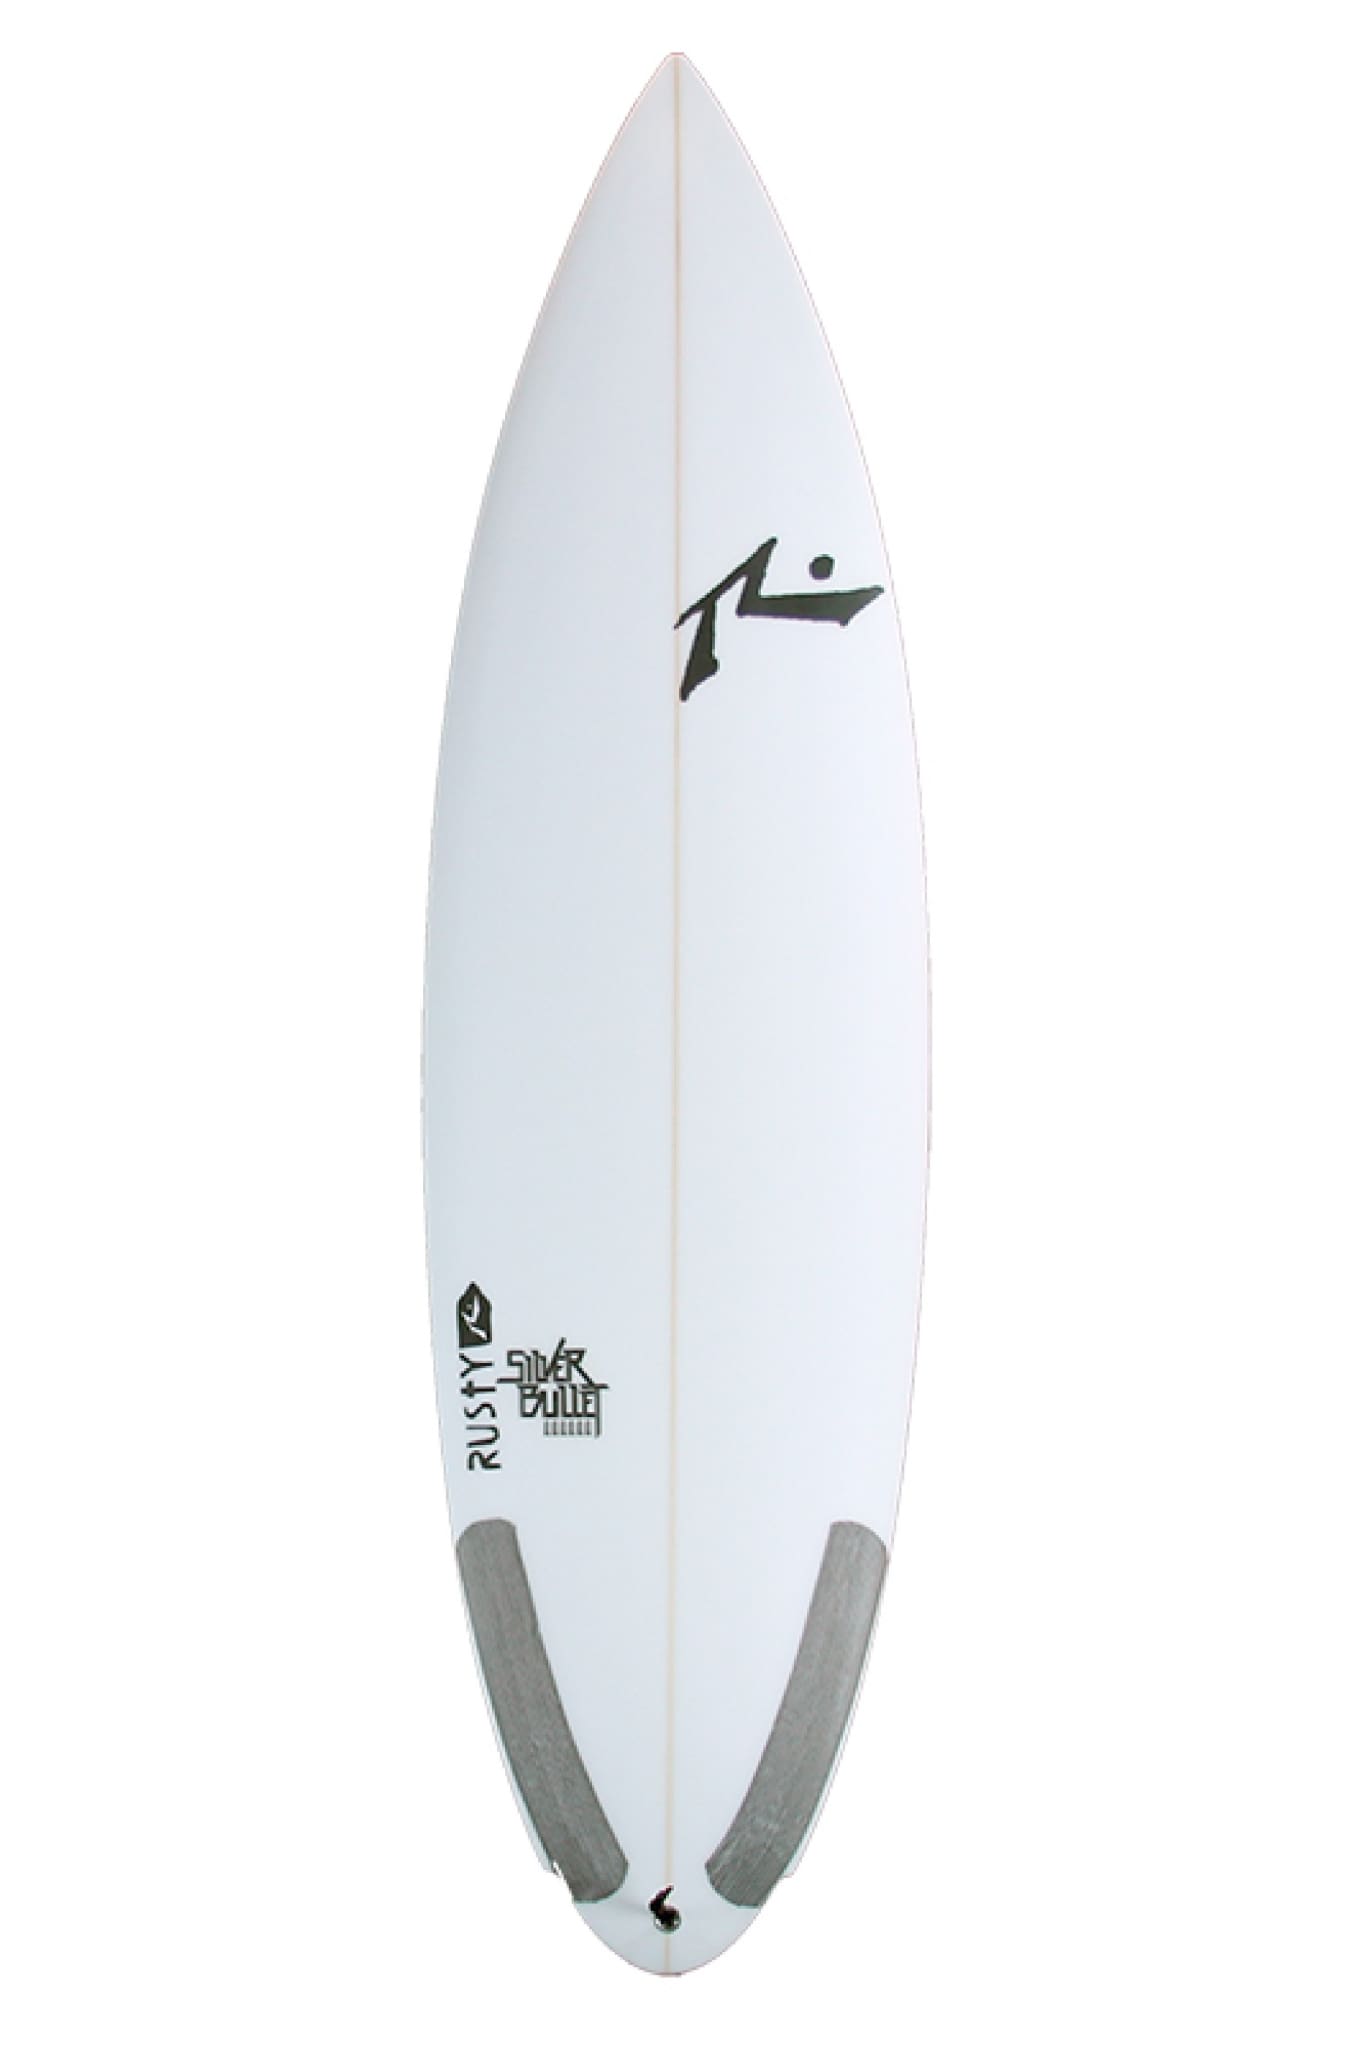 Silver Bullet | Surfboards-Rusty Surfboards South Africa